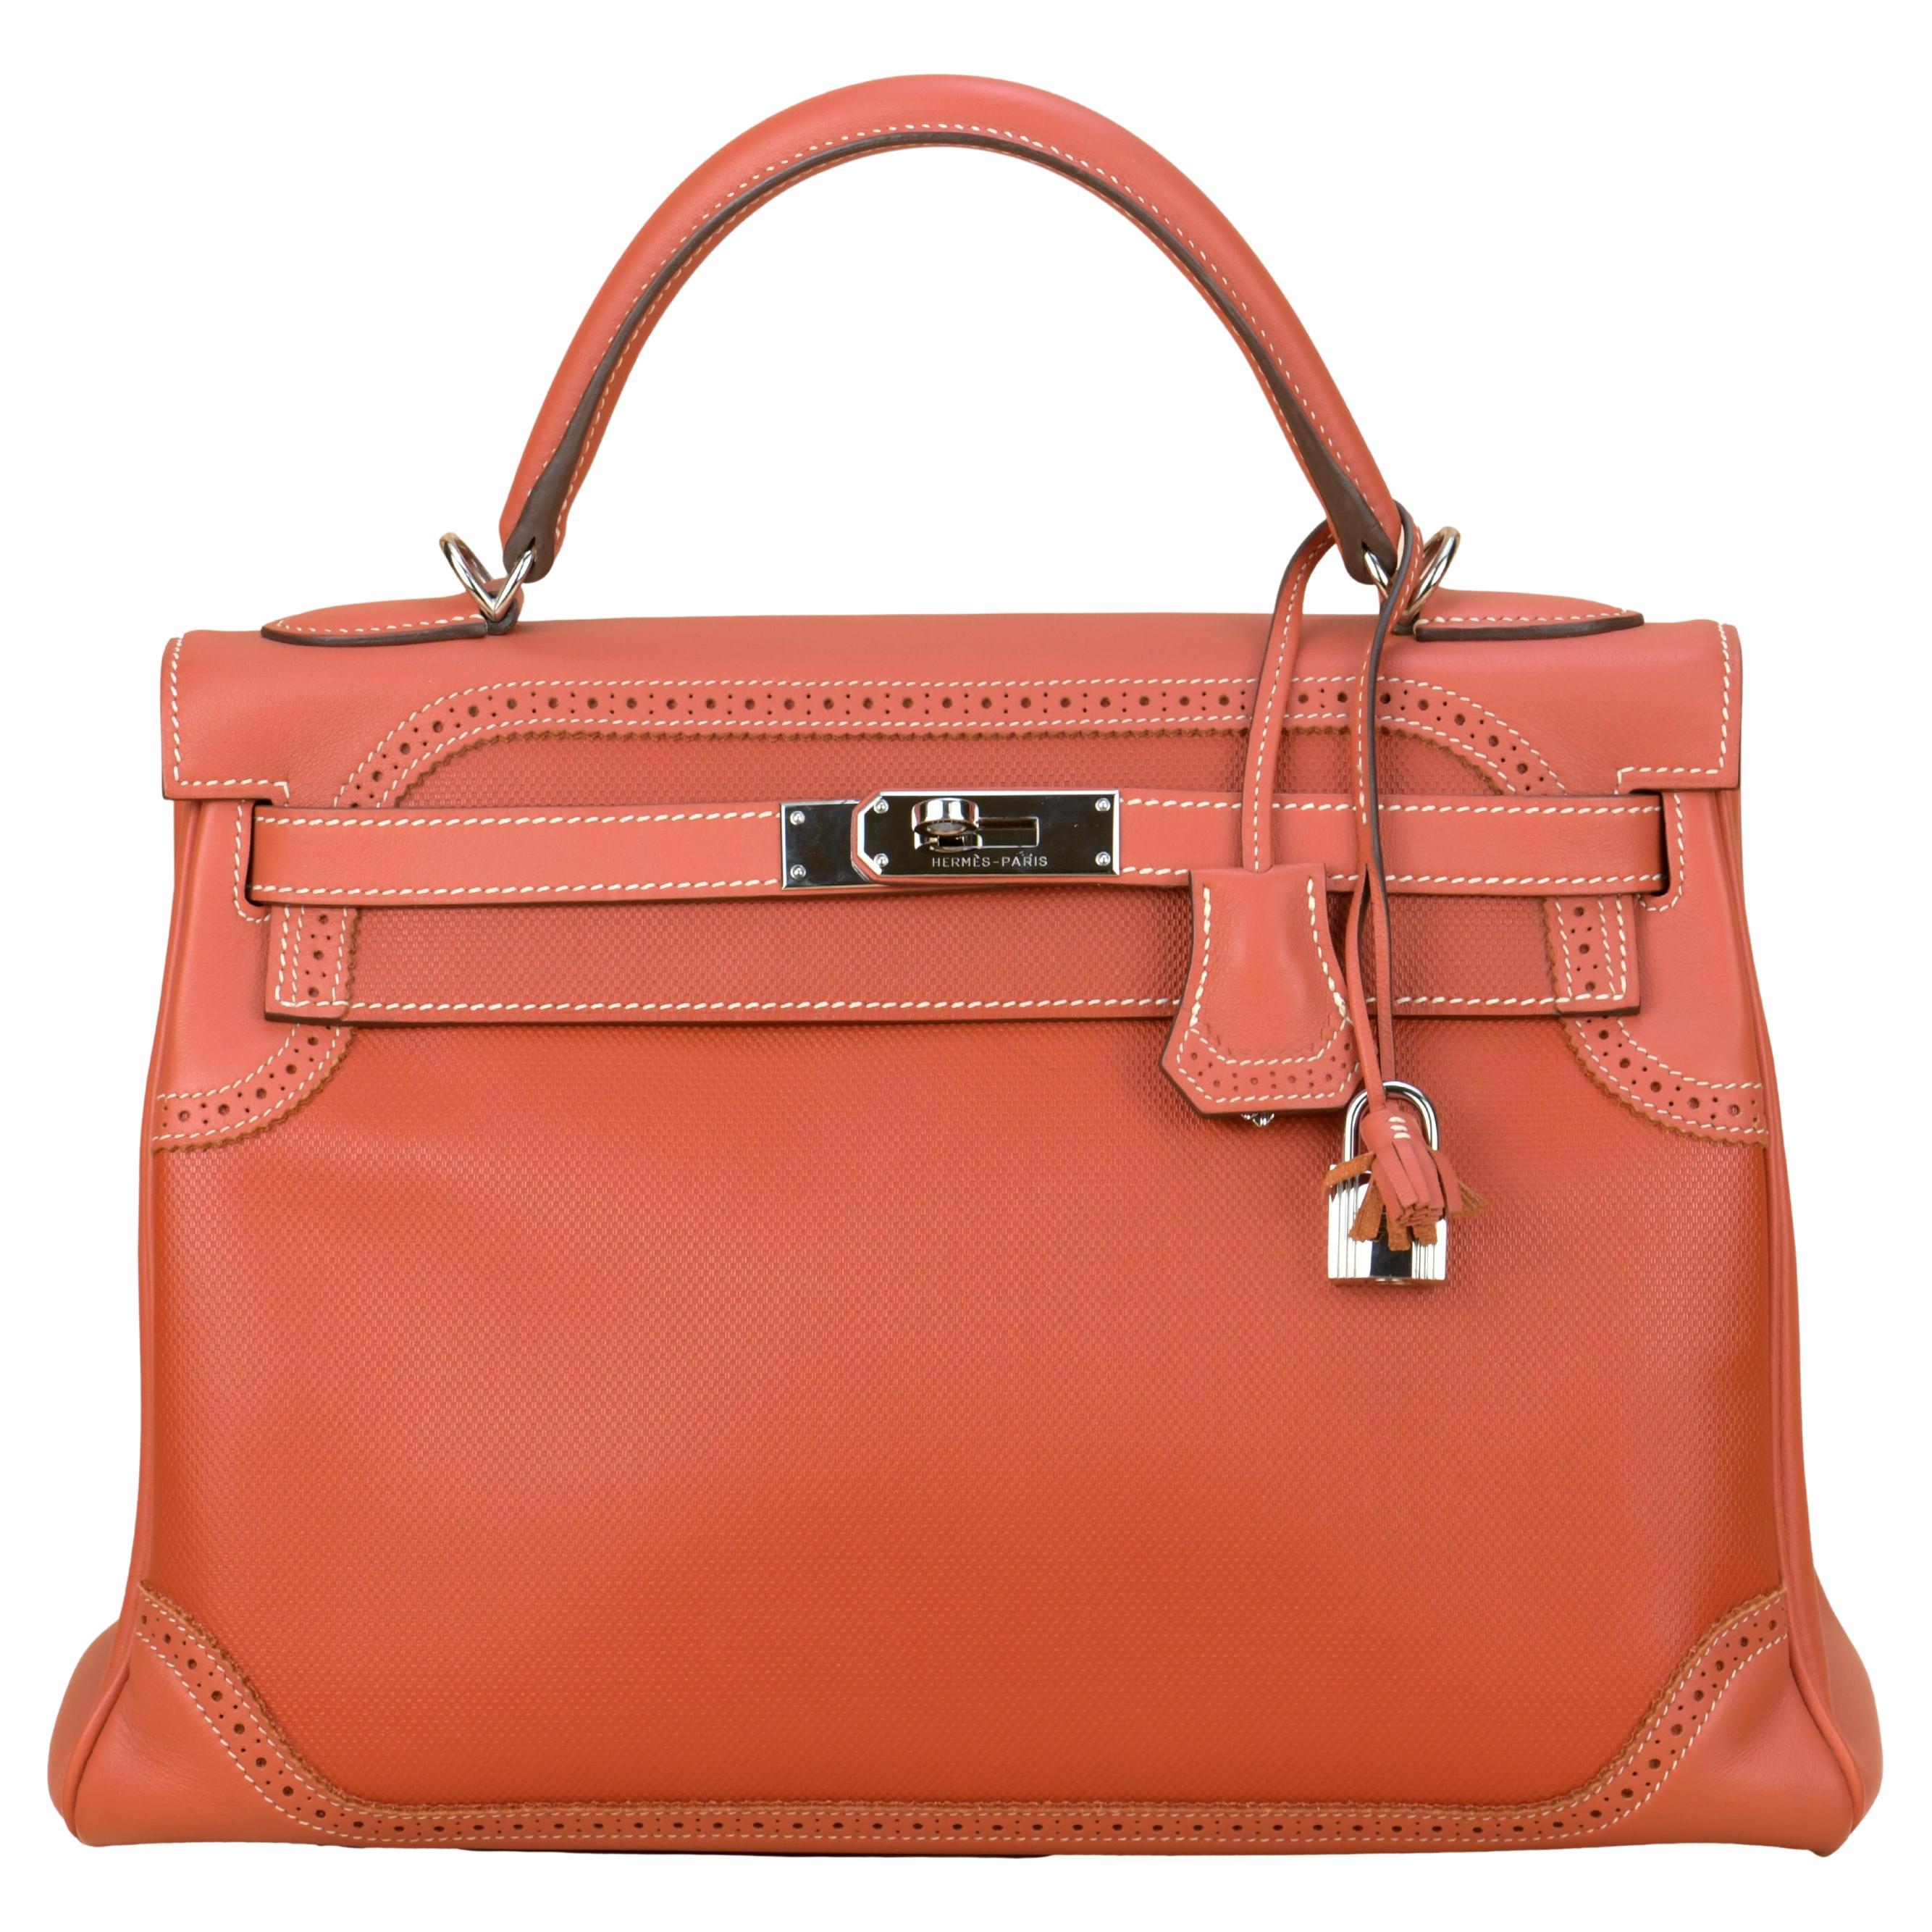 Hermès Kelly 32 Ghillies Retourne Swift Leather with Palladium Hardware For Sale